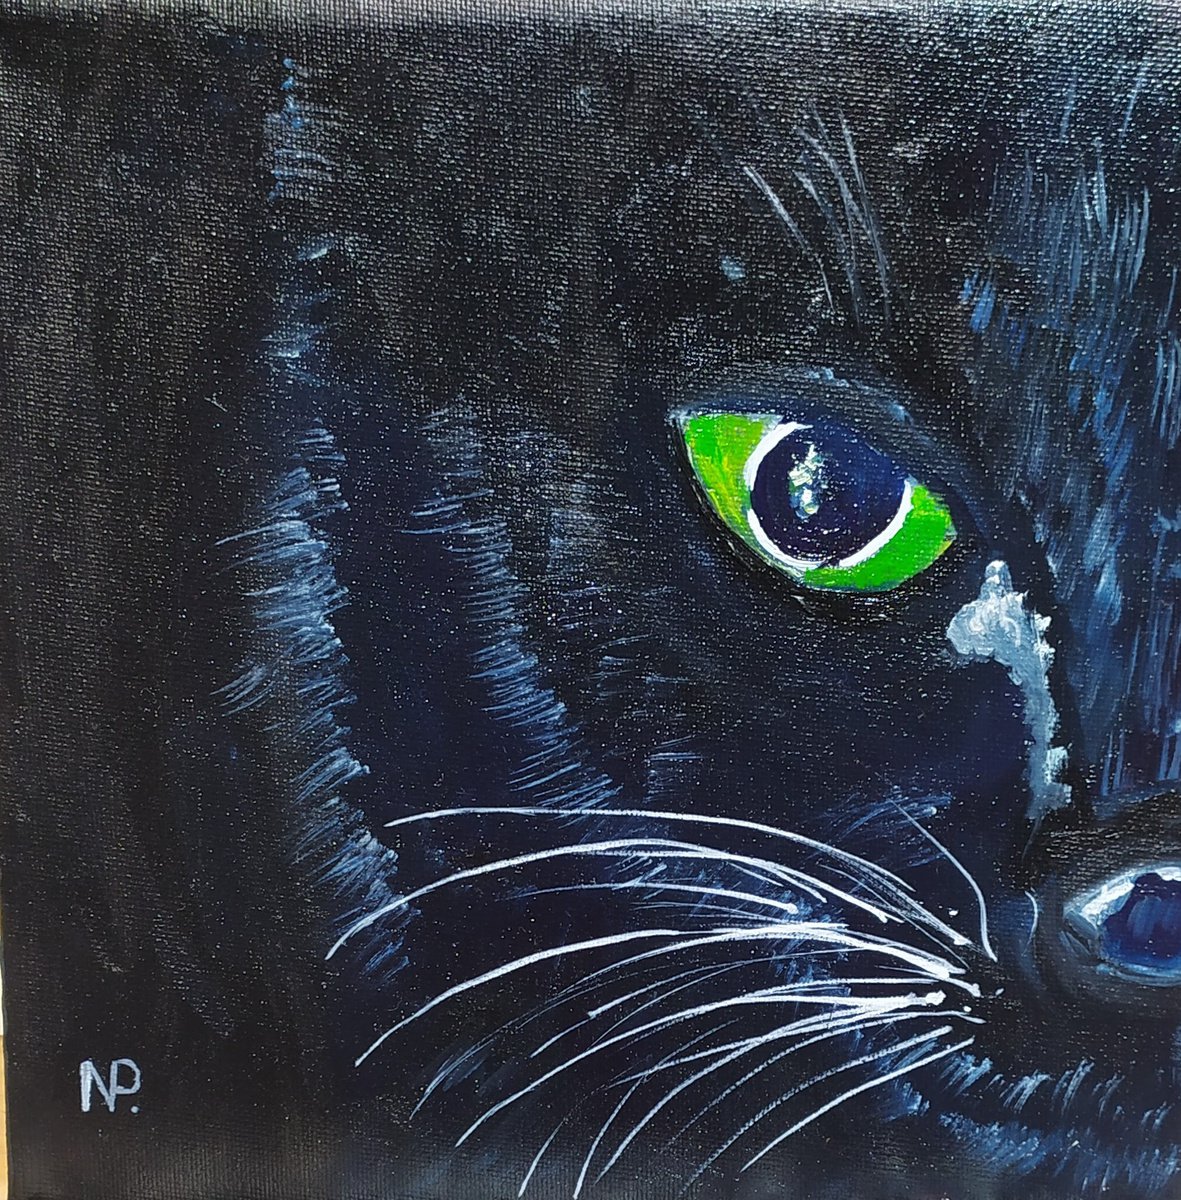 Black cat, original animal face, small gift idea, art for home, bedroom painting by Nataliia Plakhotnyk